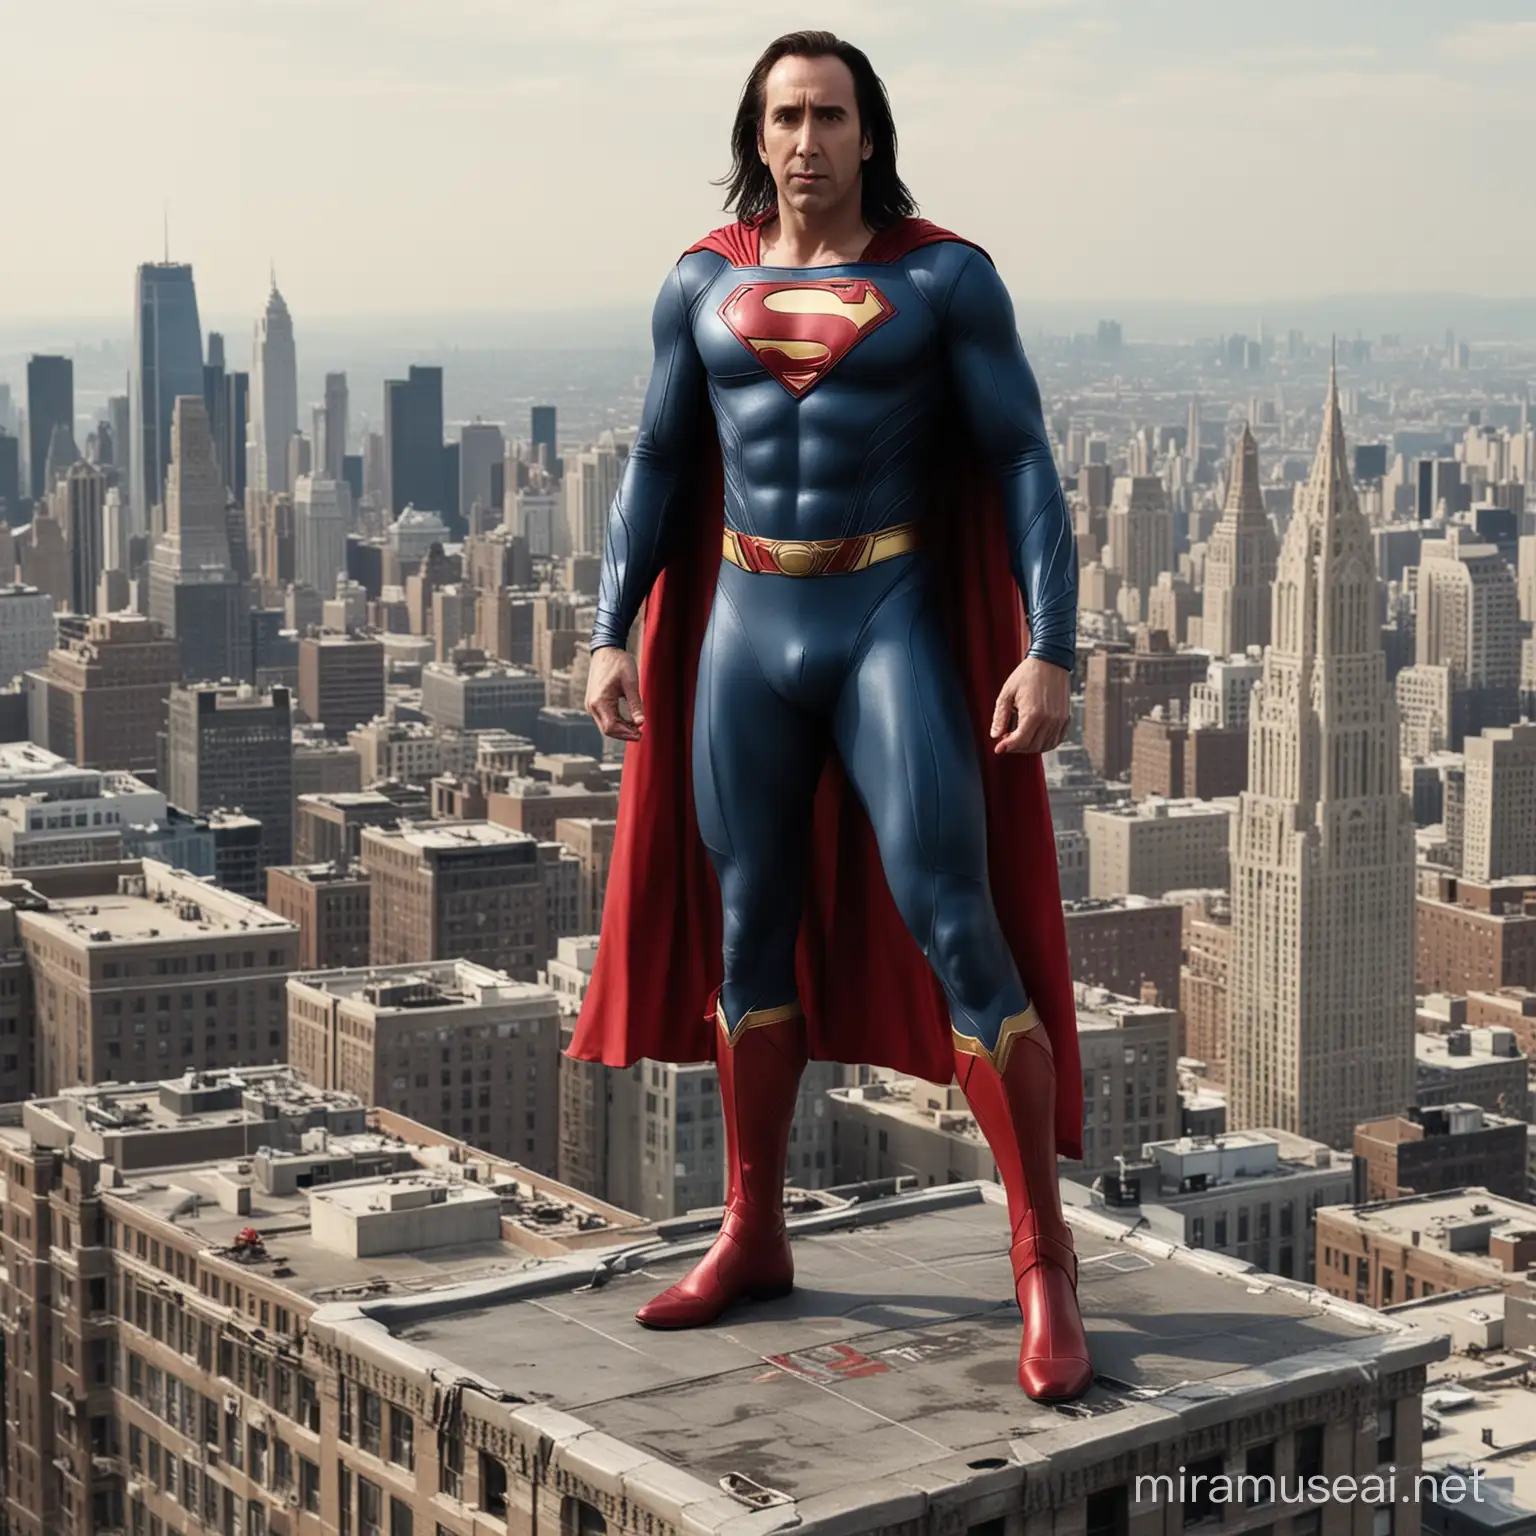 Nicolas Cage with long dark hair as Superman wearing a rubber Superman suit, Tim Burton's Superman, standing on top of a building with the Daily Planet building in the background, show his whole body, head to toe view, Superman suit made of rubber  